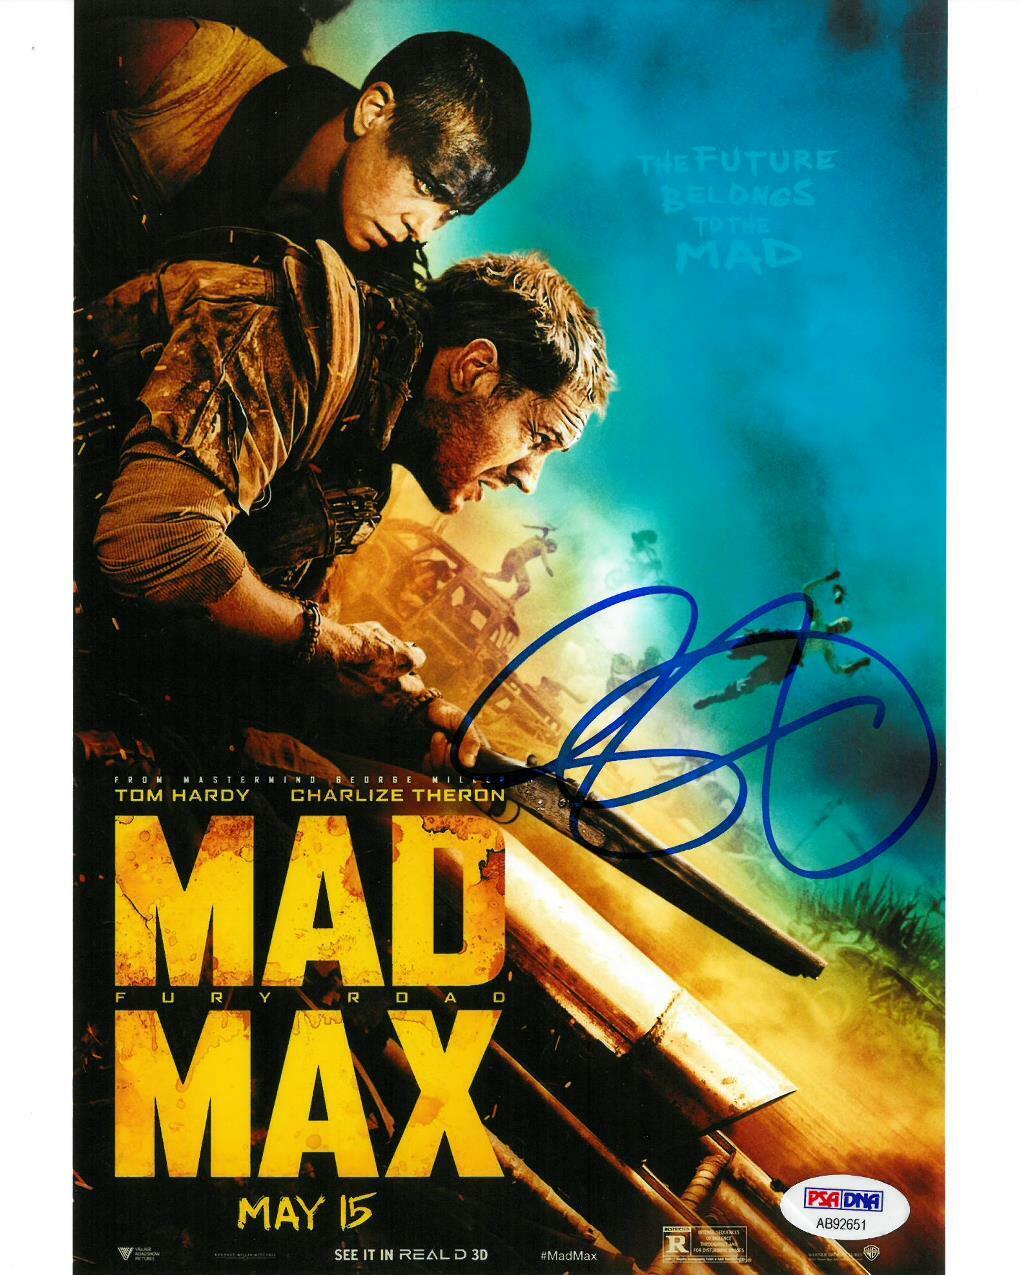 George Miller Signed Mad Max Authentic Autographed 8x10 Photo Poster painting PSA/DNA #AB92651